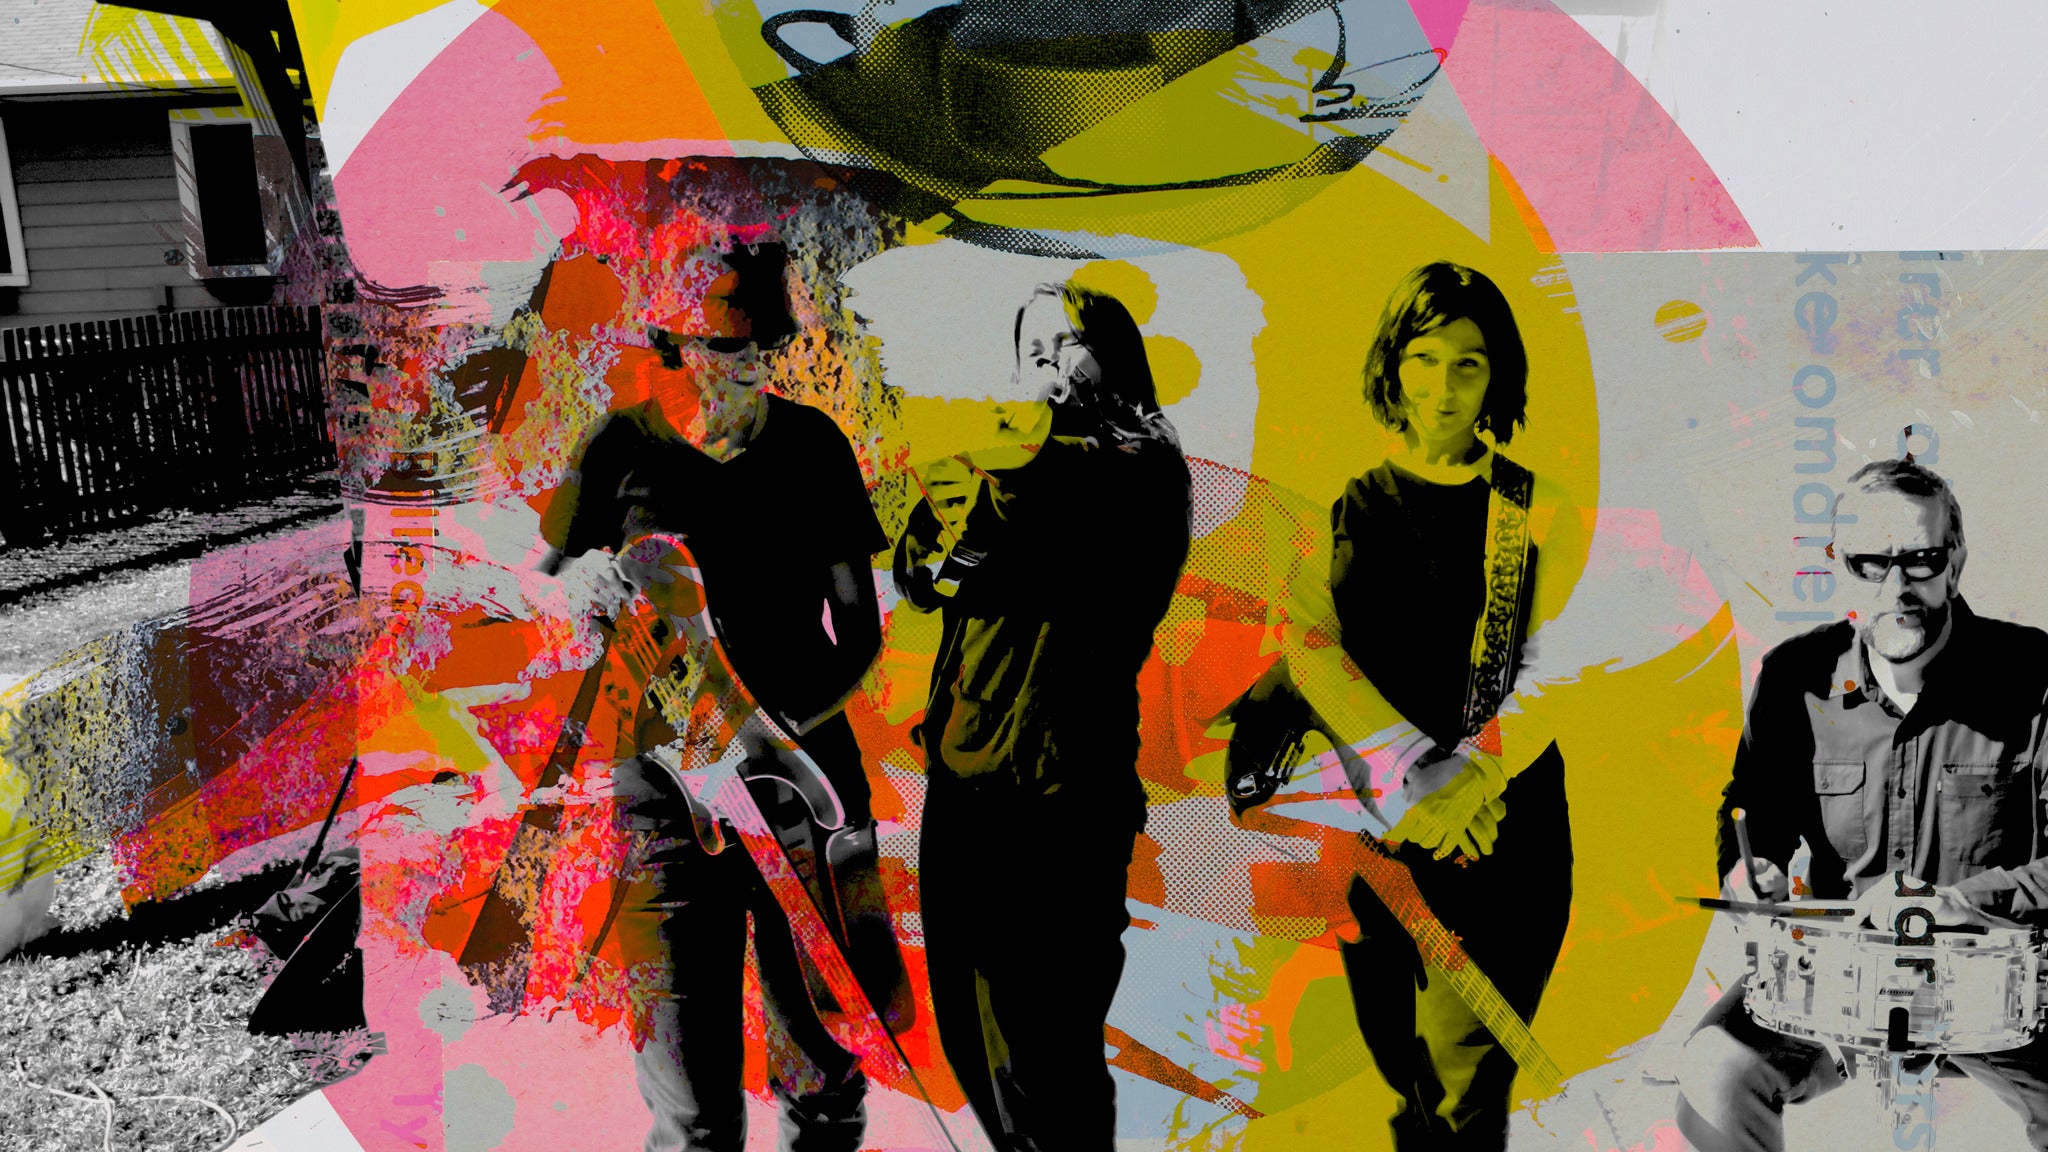 Image used with permission from Ticketmaster | The Breeders tickets